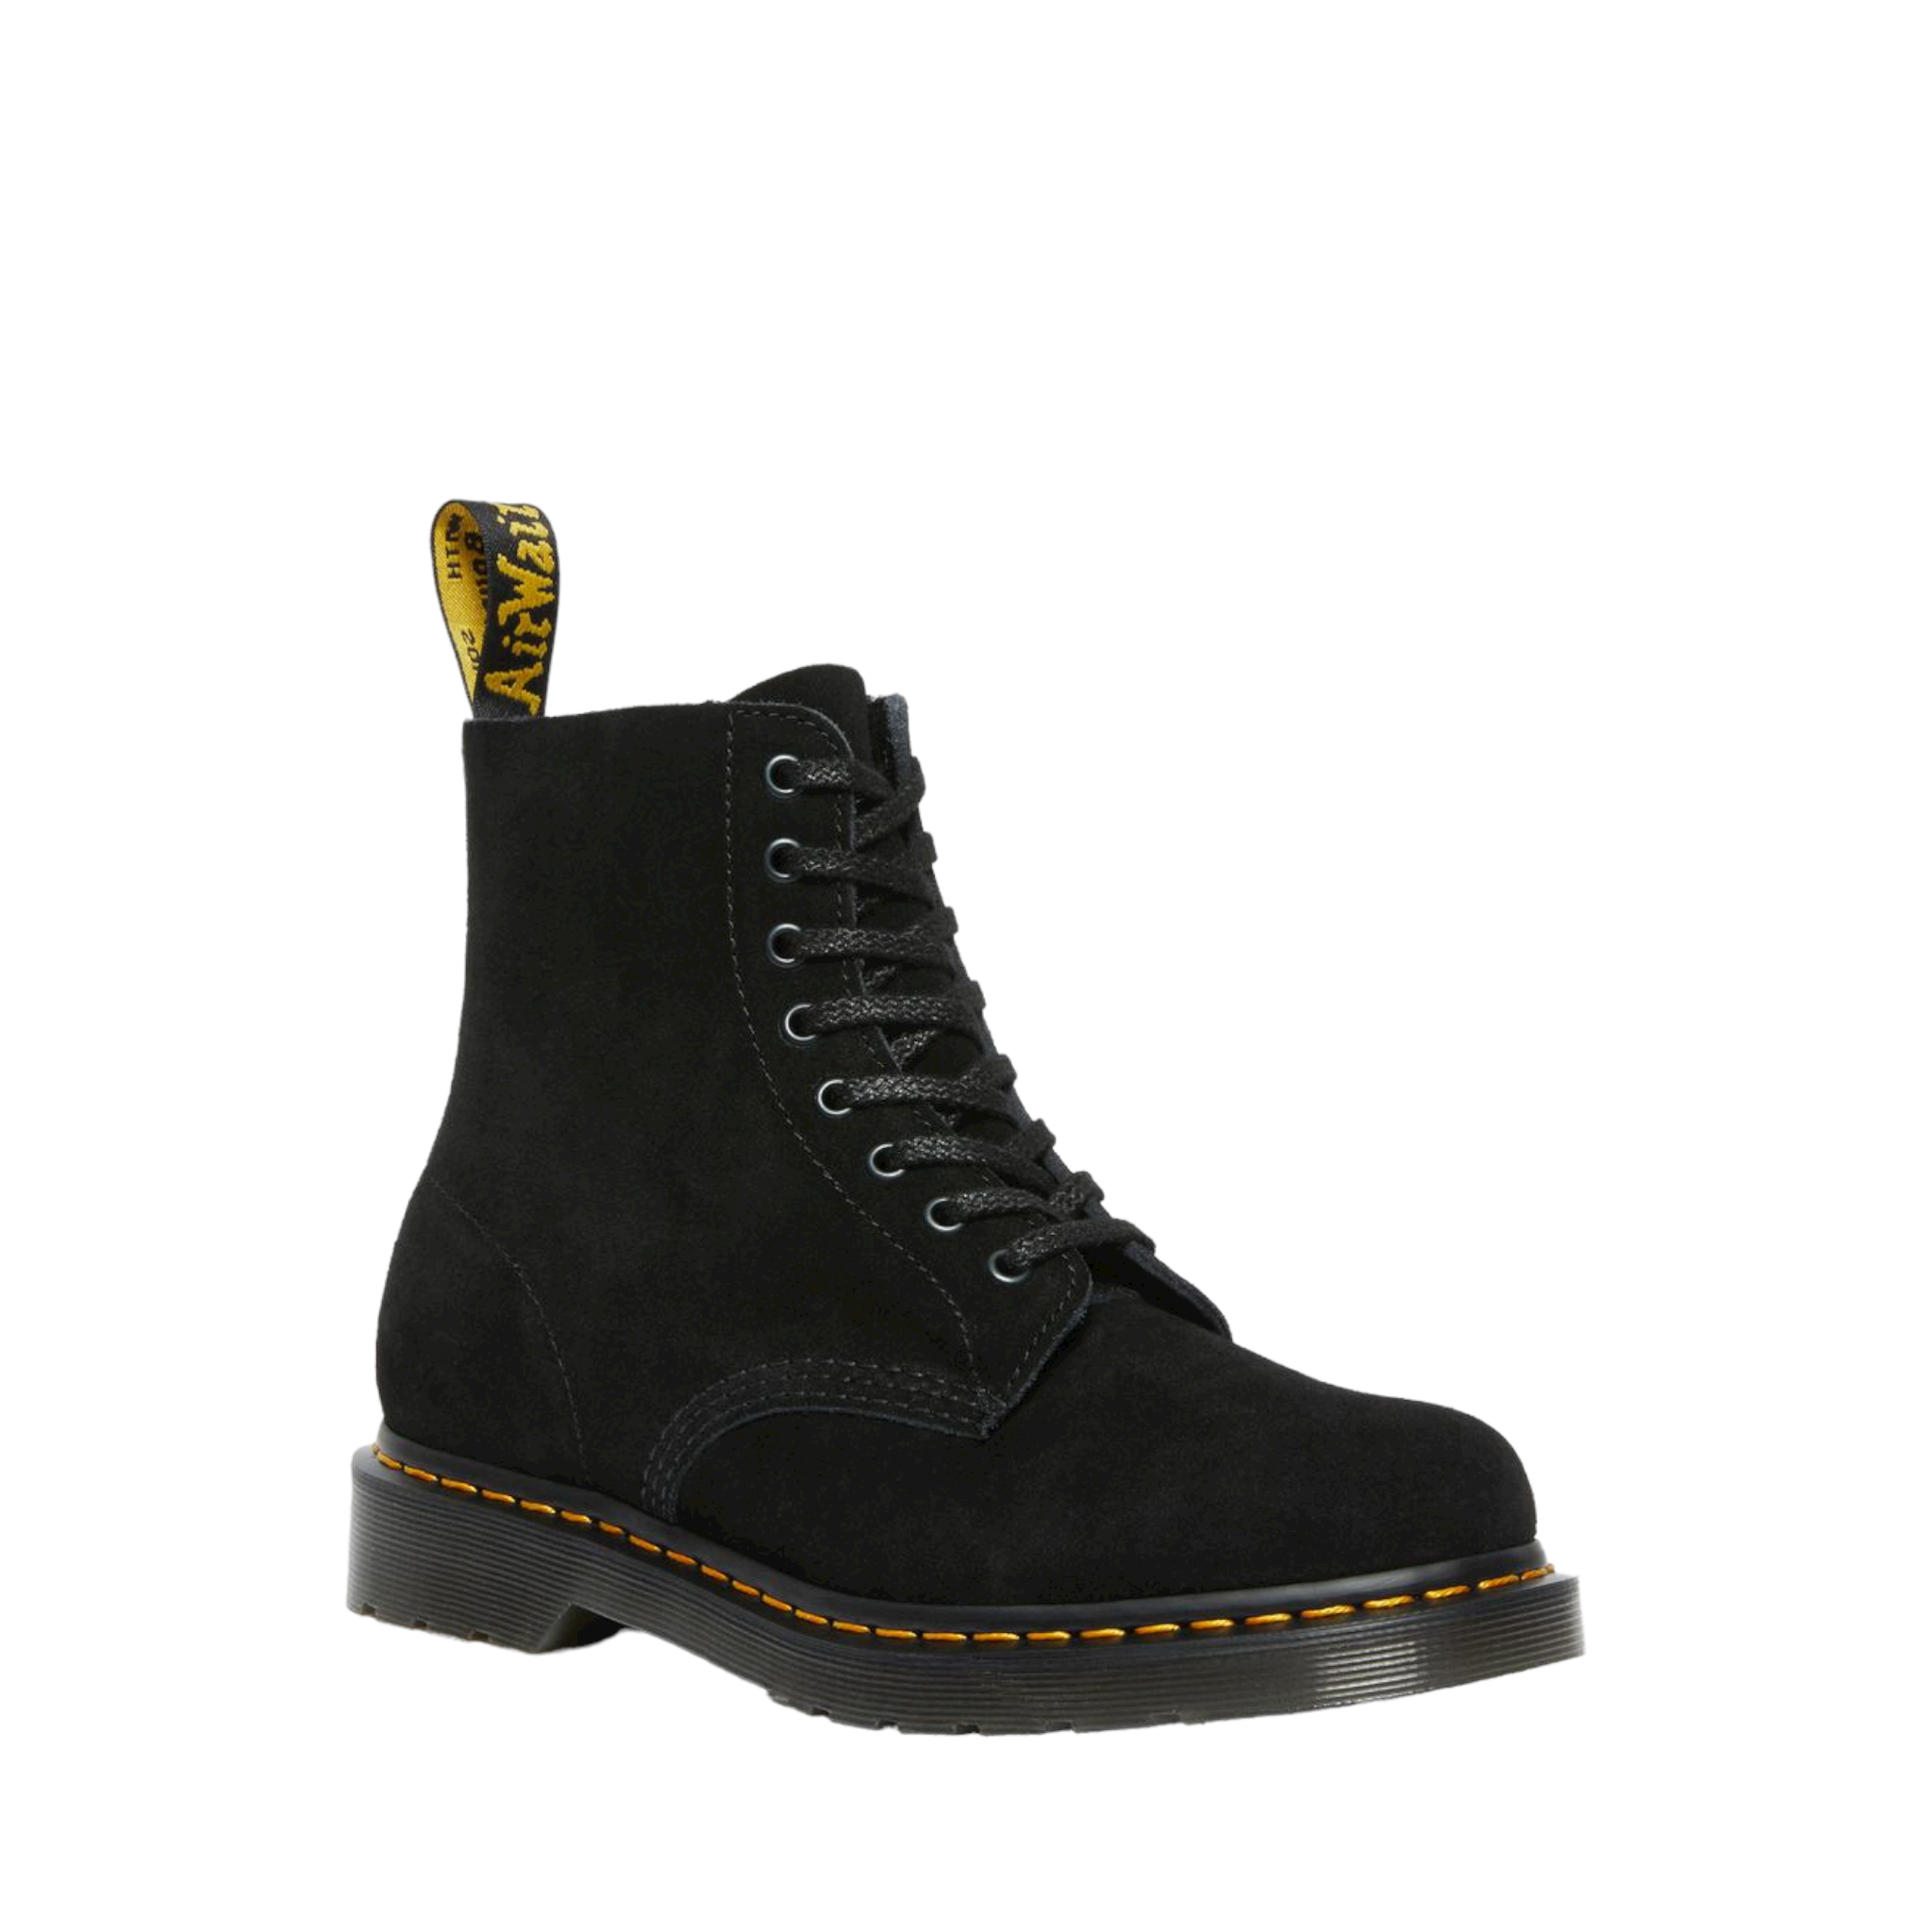 1460 Pascal Suede - shoe&amp;me - Dr. Martens - Boot - Boots, Summer 22, Unisex, Womens